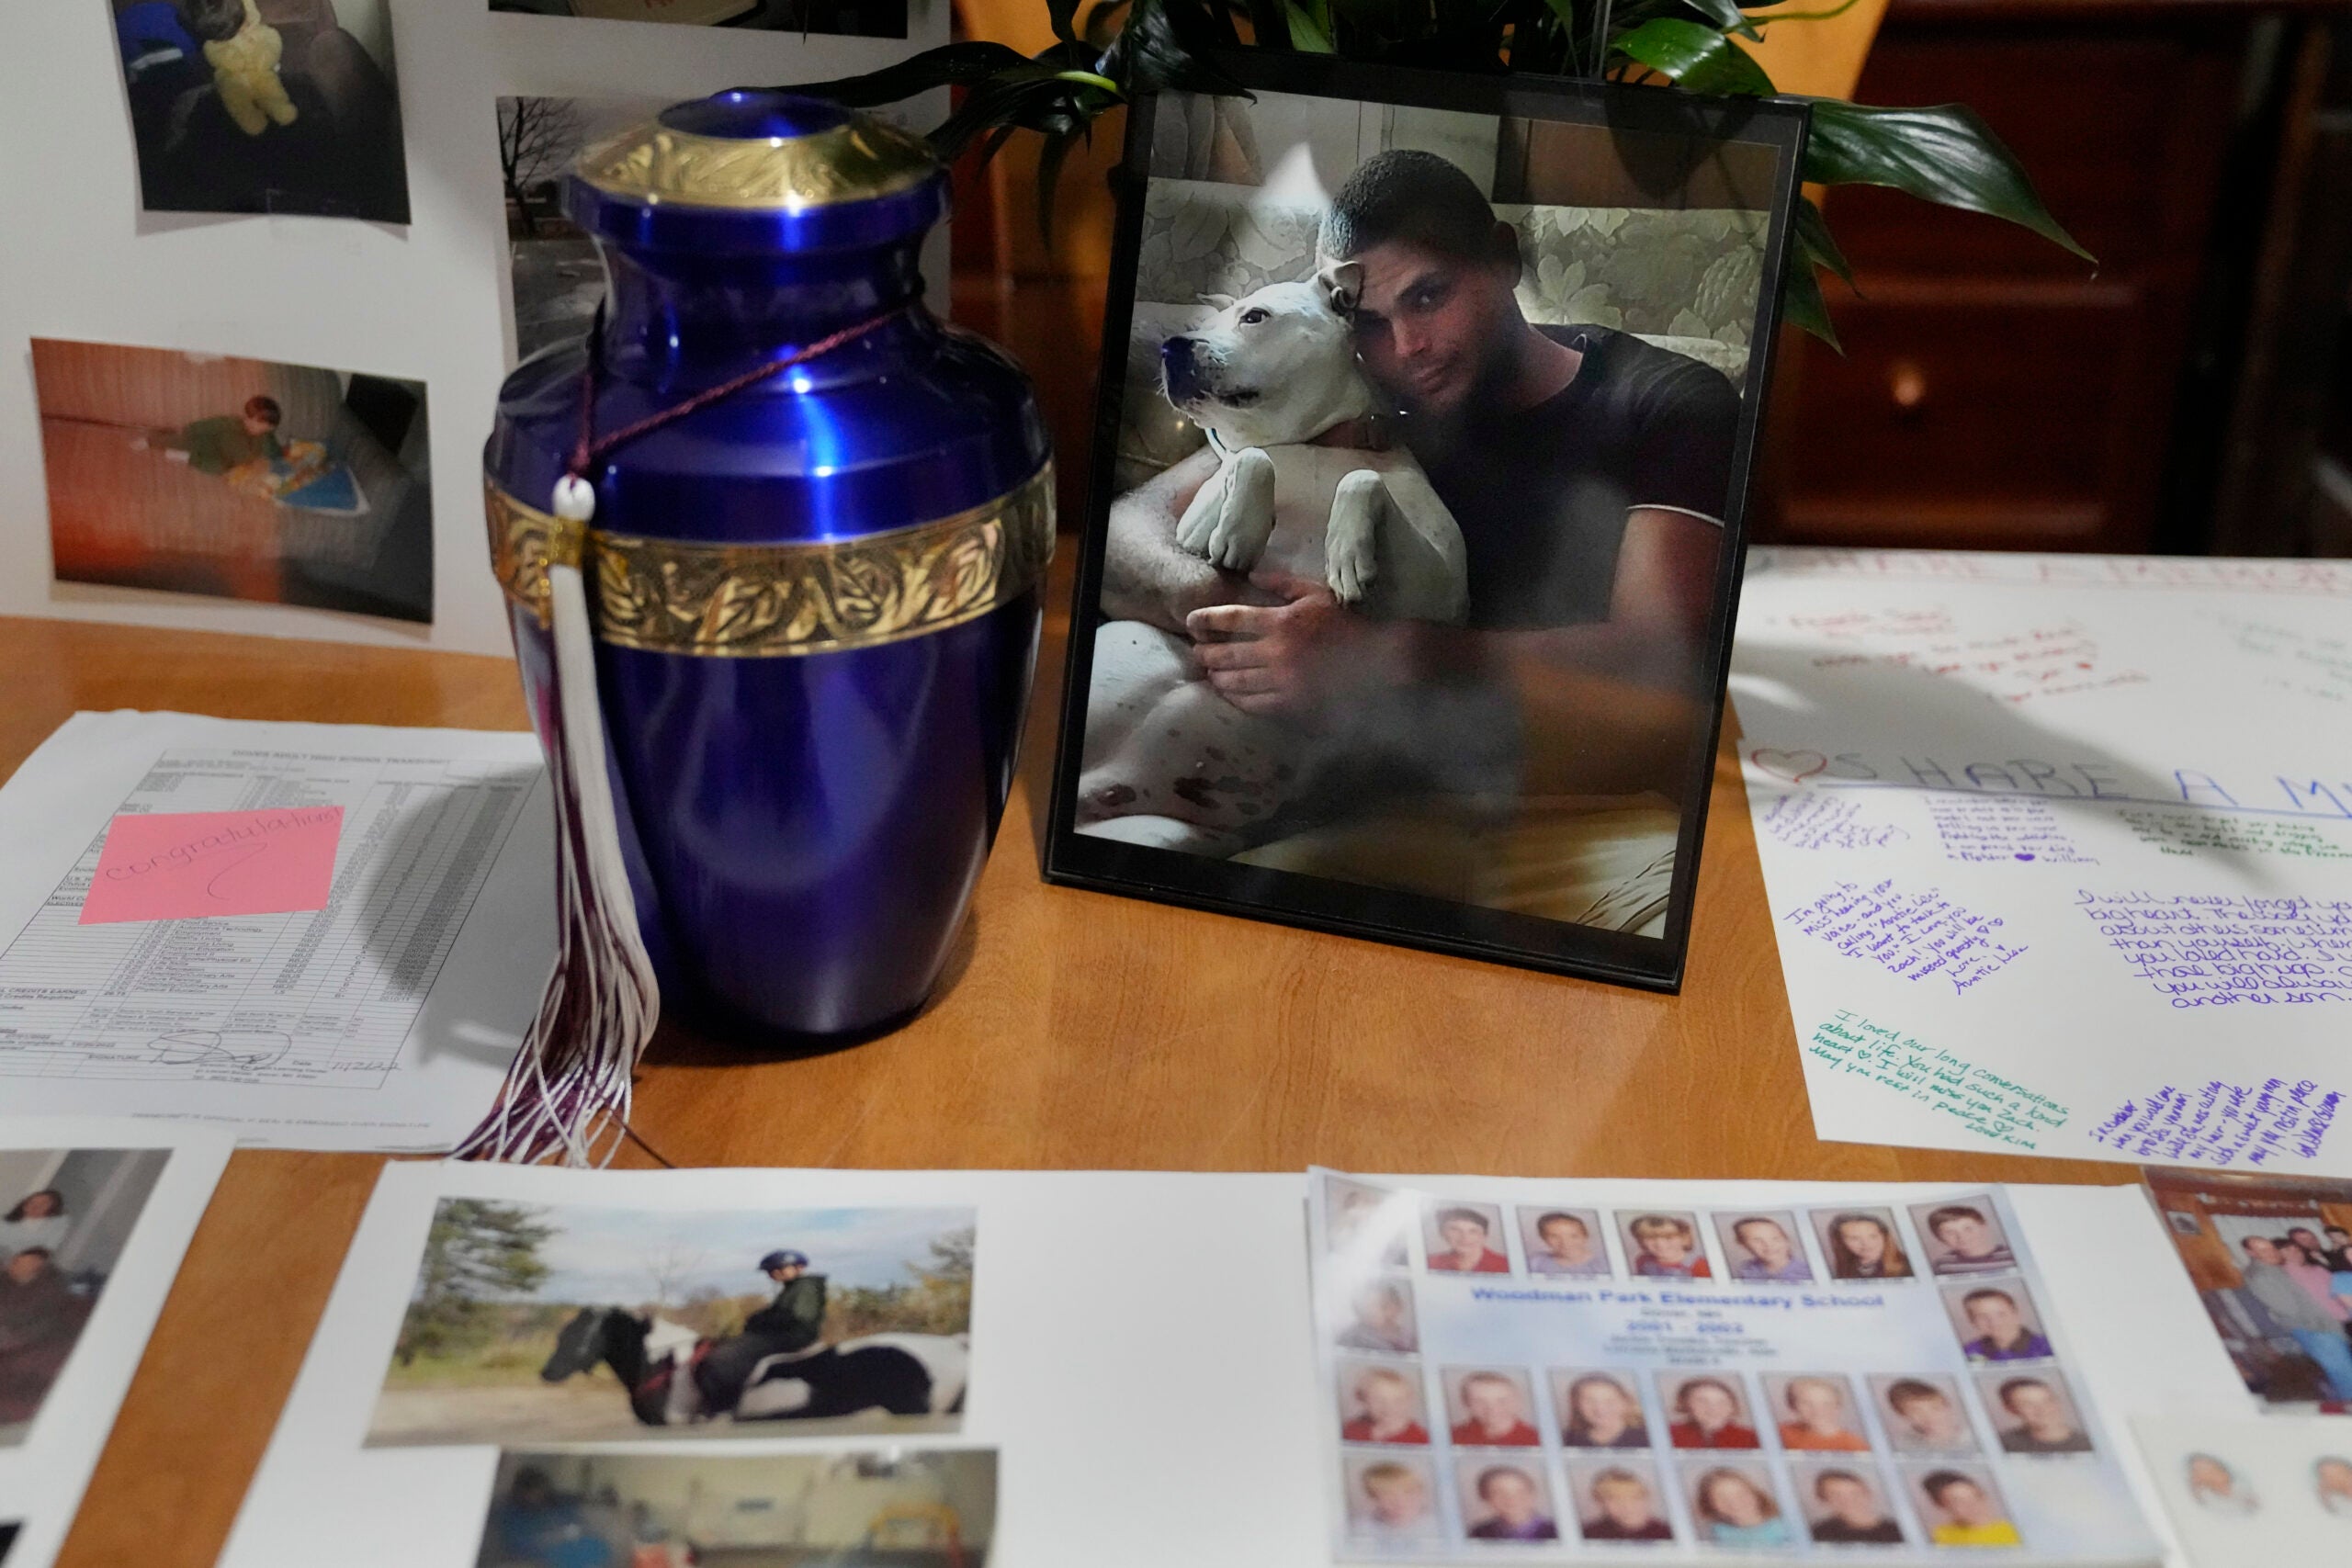 Family photographs of Zach Robinson are displayed on the dining room table next to an urn containing his remains. 